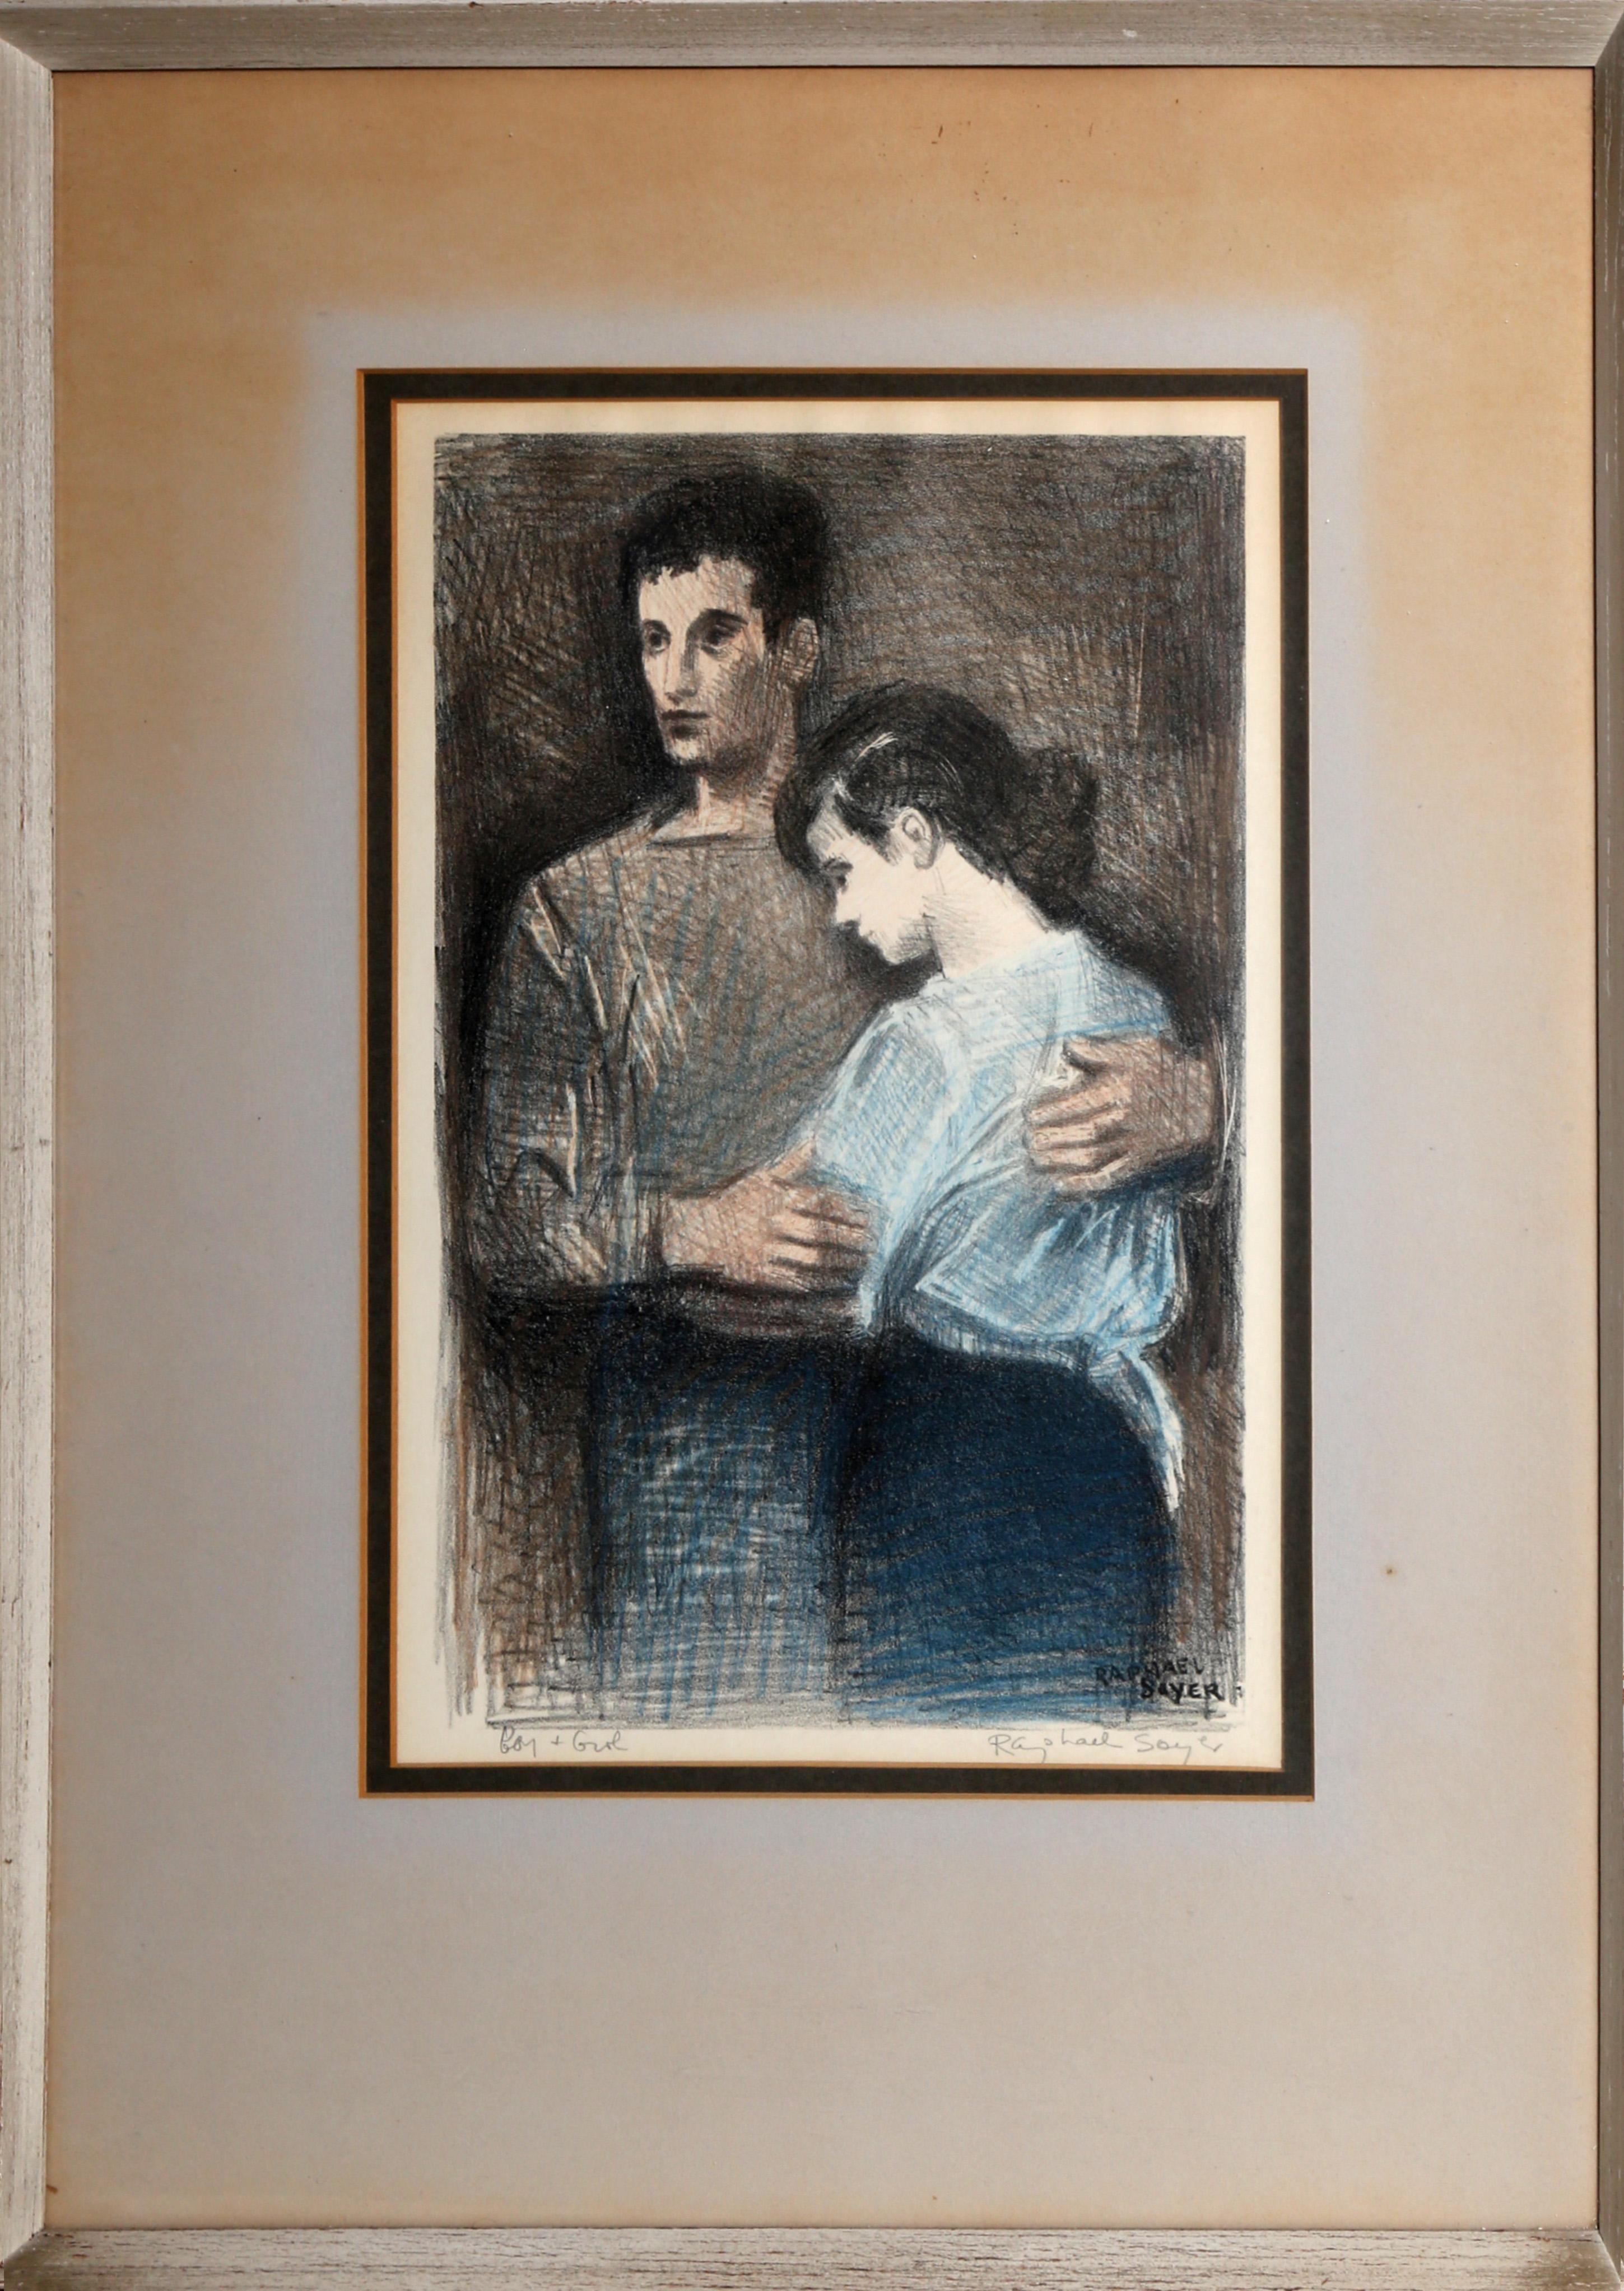 Artist: Raphael Soyer
Title: Boy and Girl
Year: circa 1950
Medium: Lithograph on paper, signed in pencil l.r.
Image Size: 12 x 7.5 in. (30.48 x 19.05 cm)
Frame Size: 21 x 15.5 inches

Reference: Fig. 68 in 